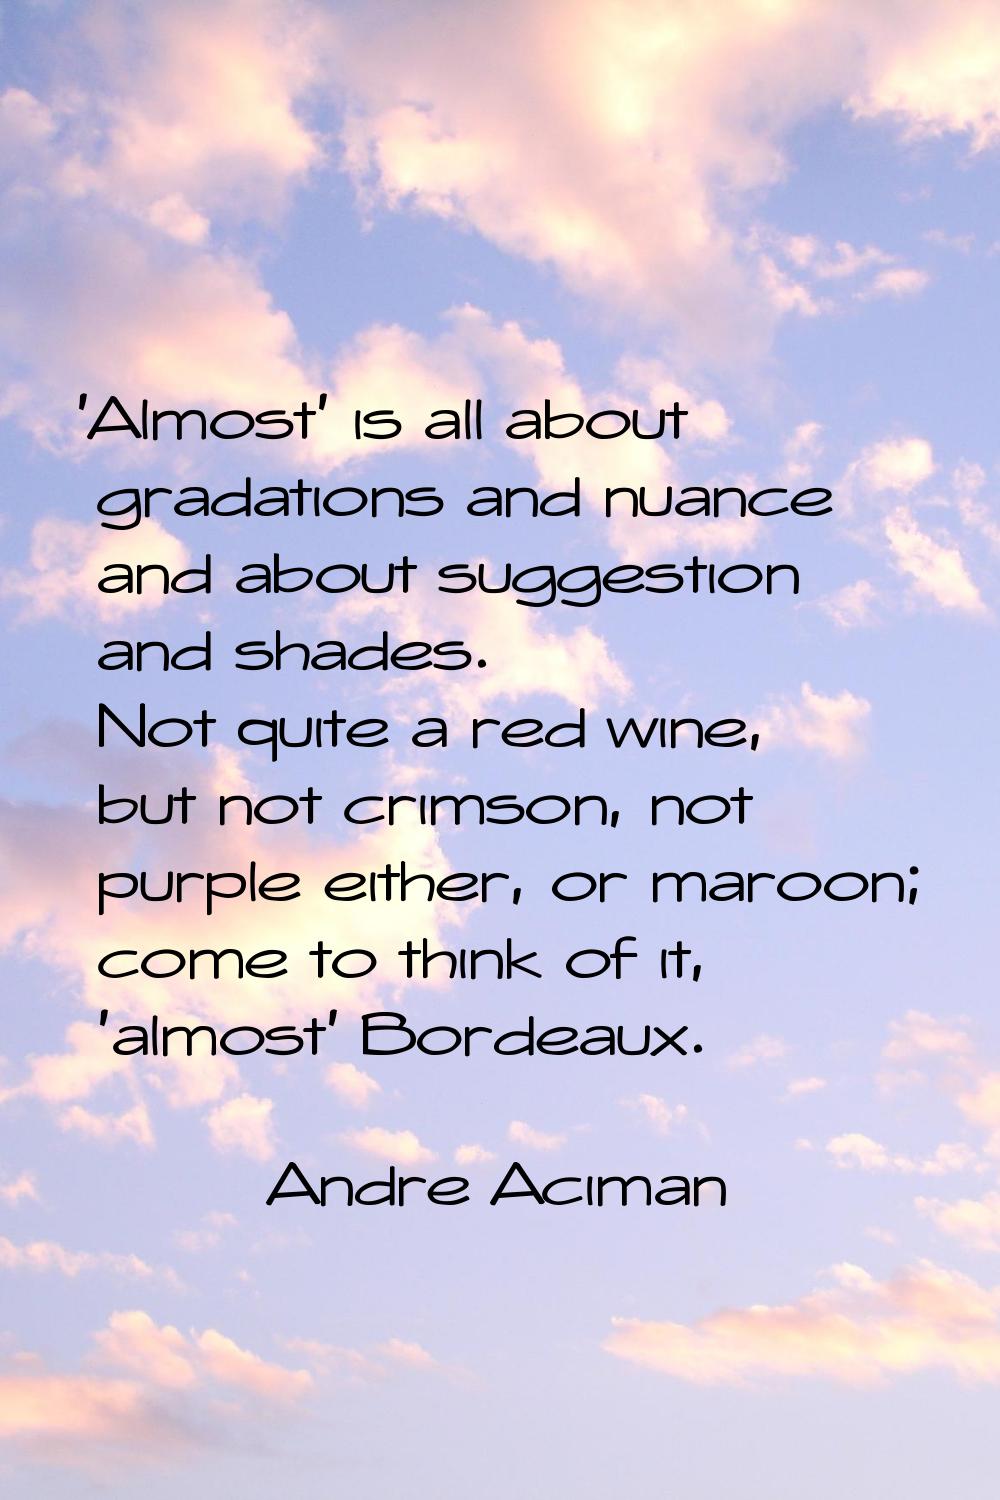 'Almost' is all about gradations and nuance and about suggestion and shades. Not quite a red wine, 